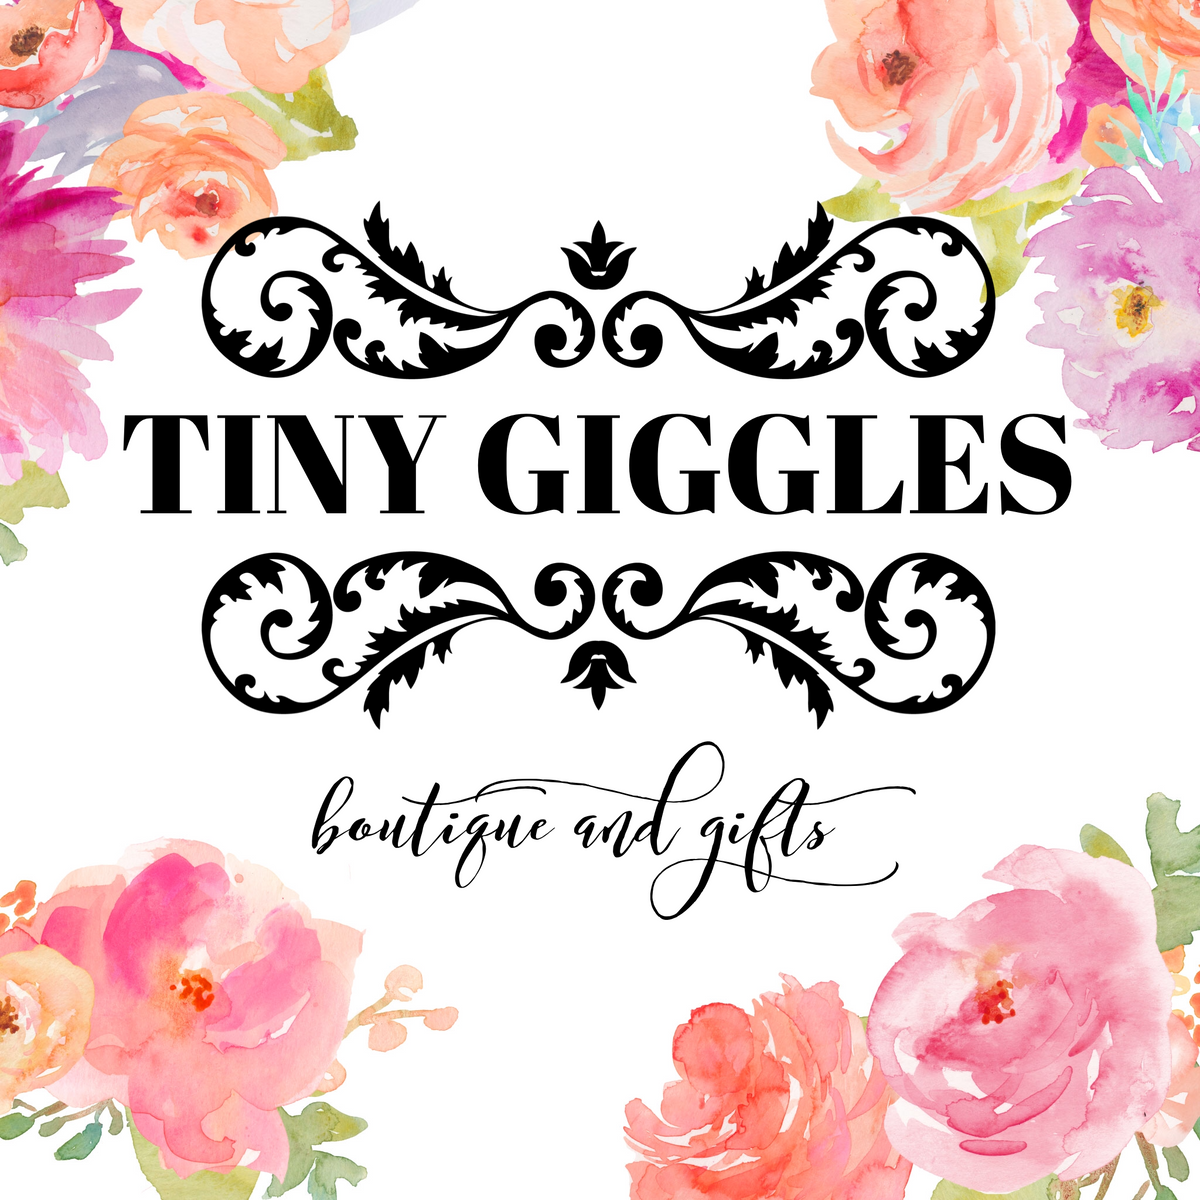 Tiny Giggles Boutique and Gifts